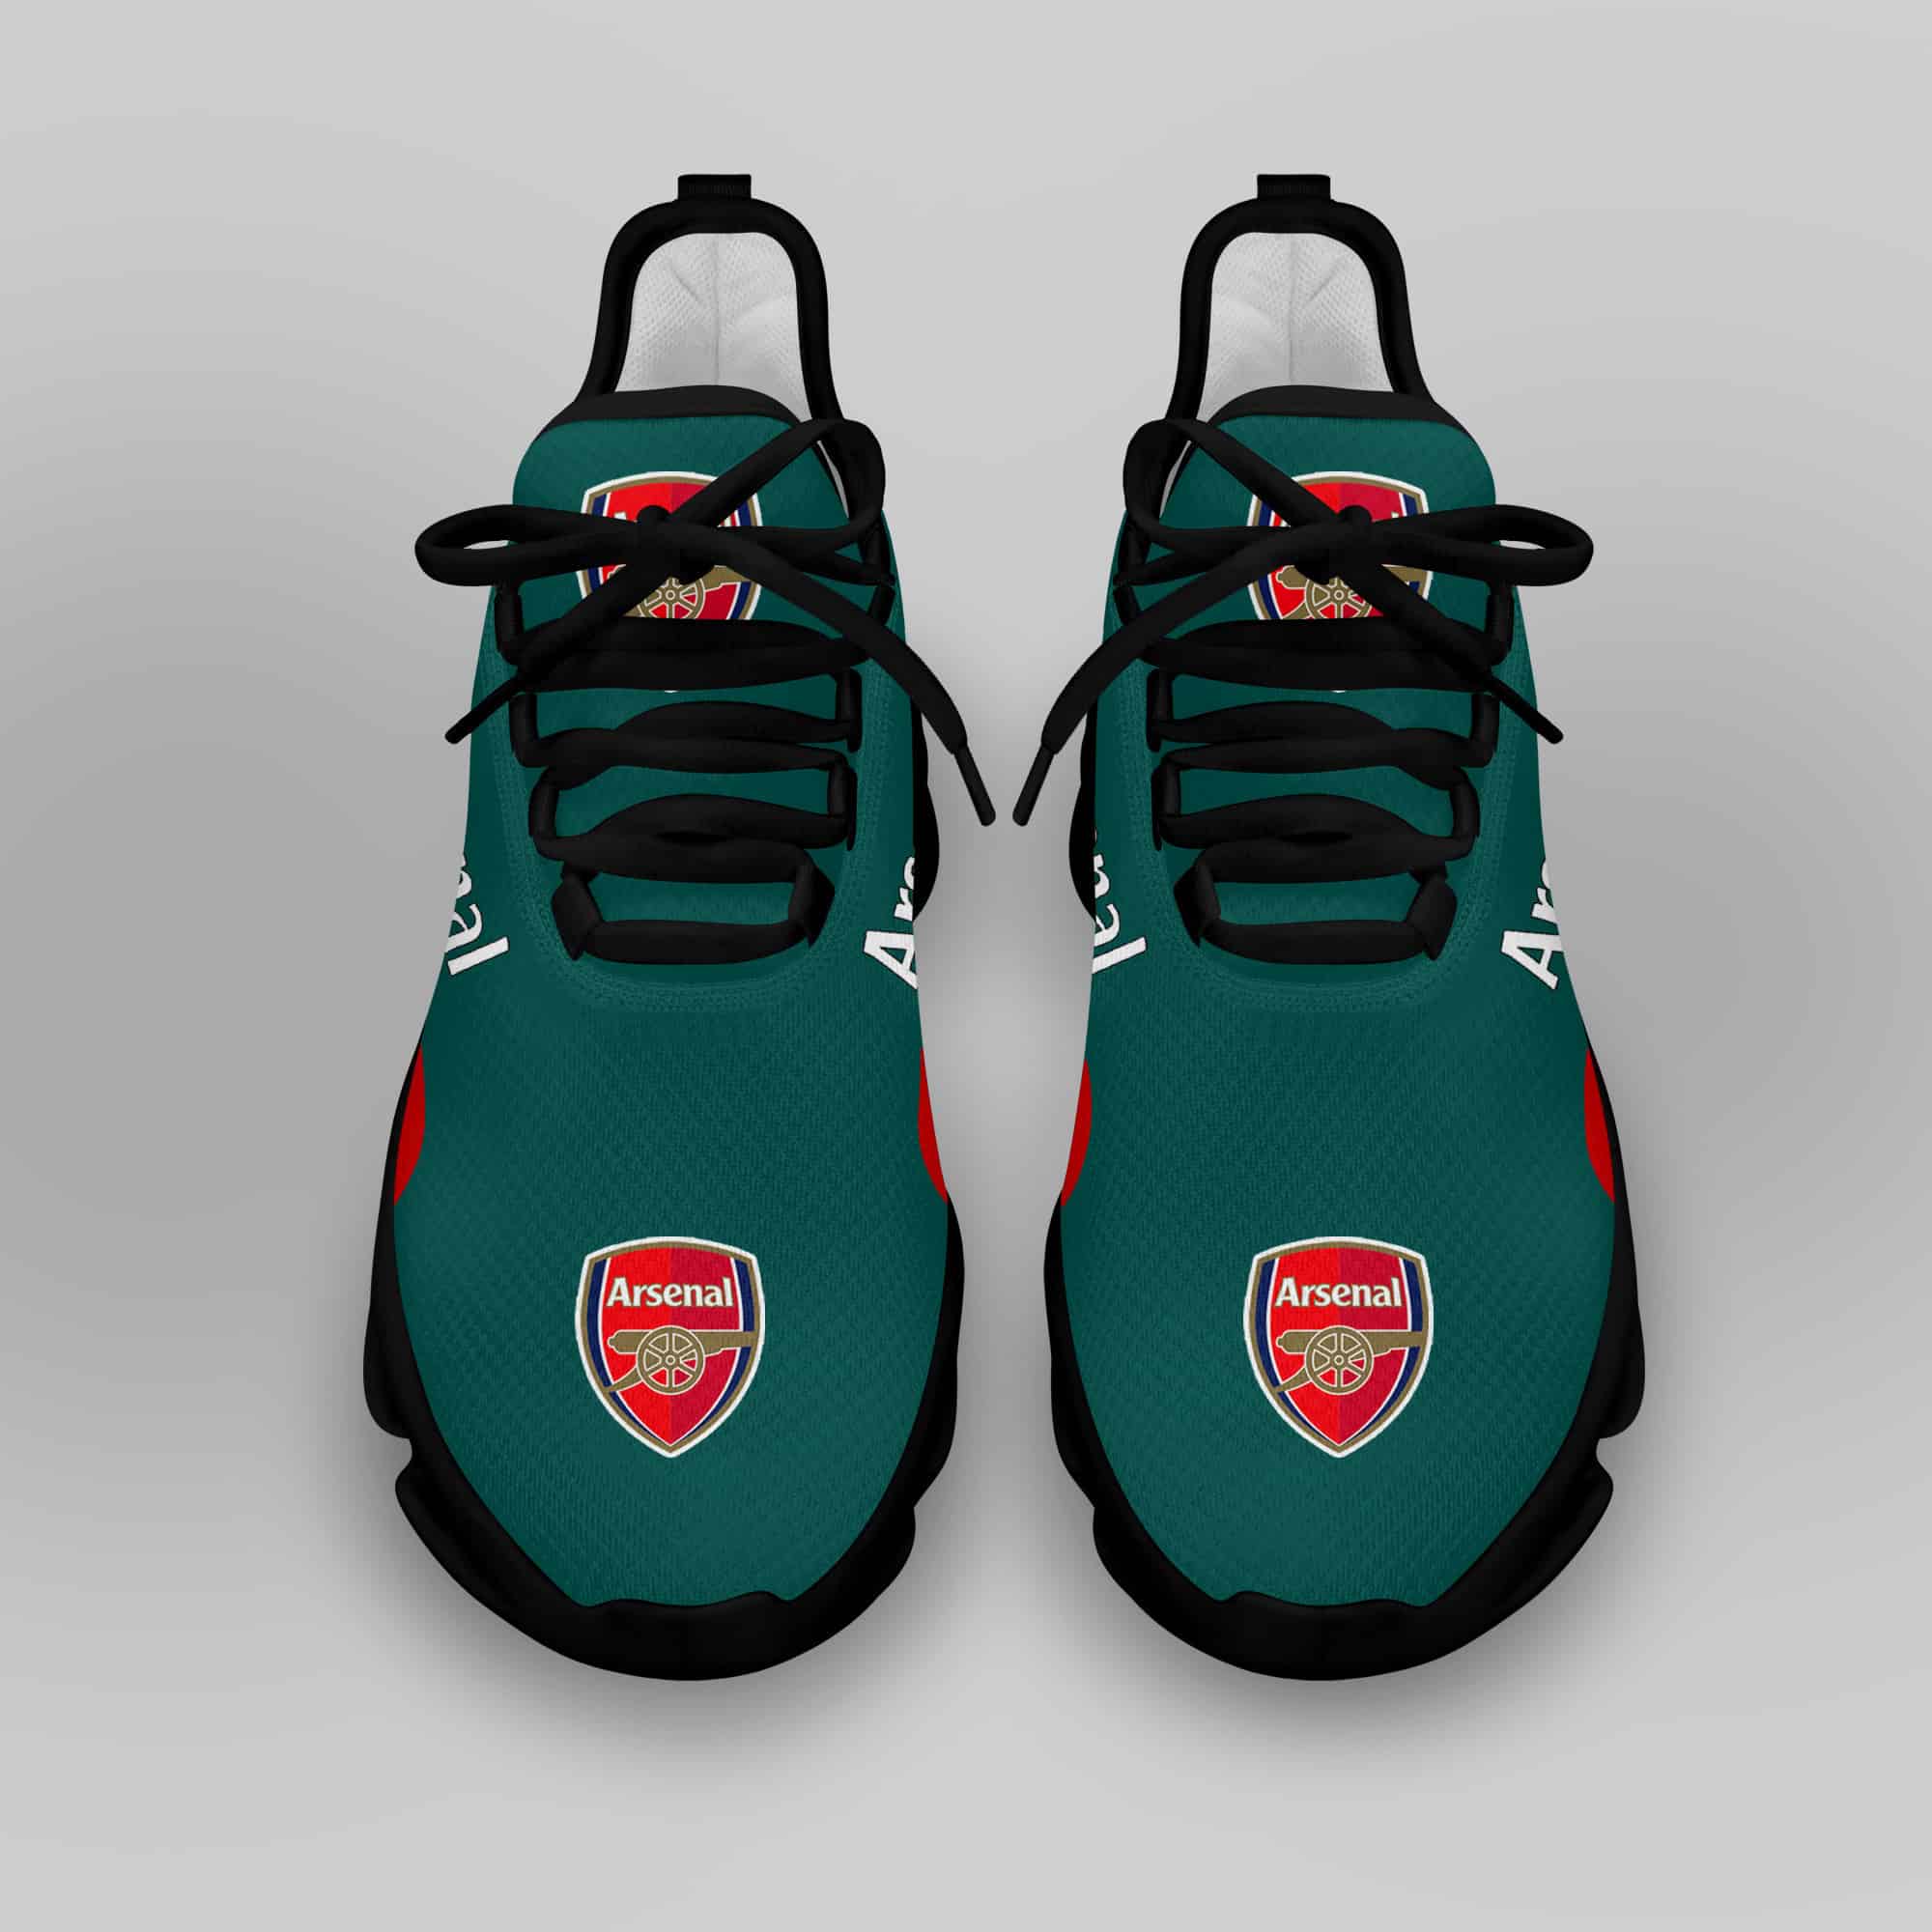 Arsenal Running Shoes Max Soul Shoes Sneakers Ver 5 4